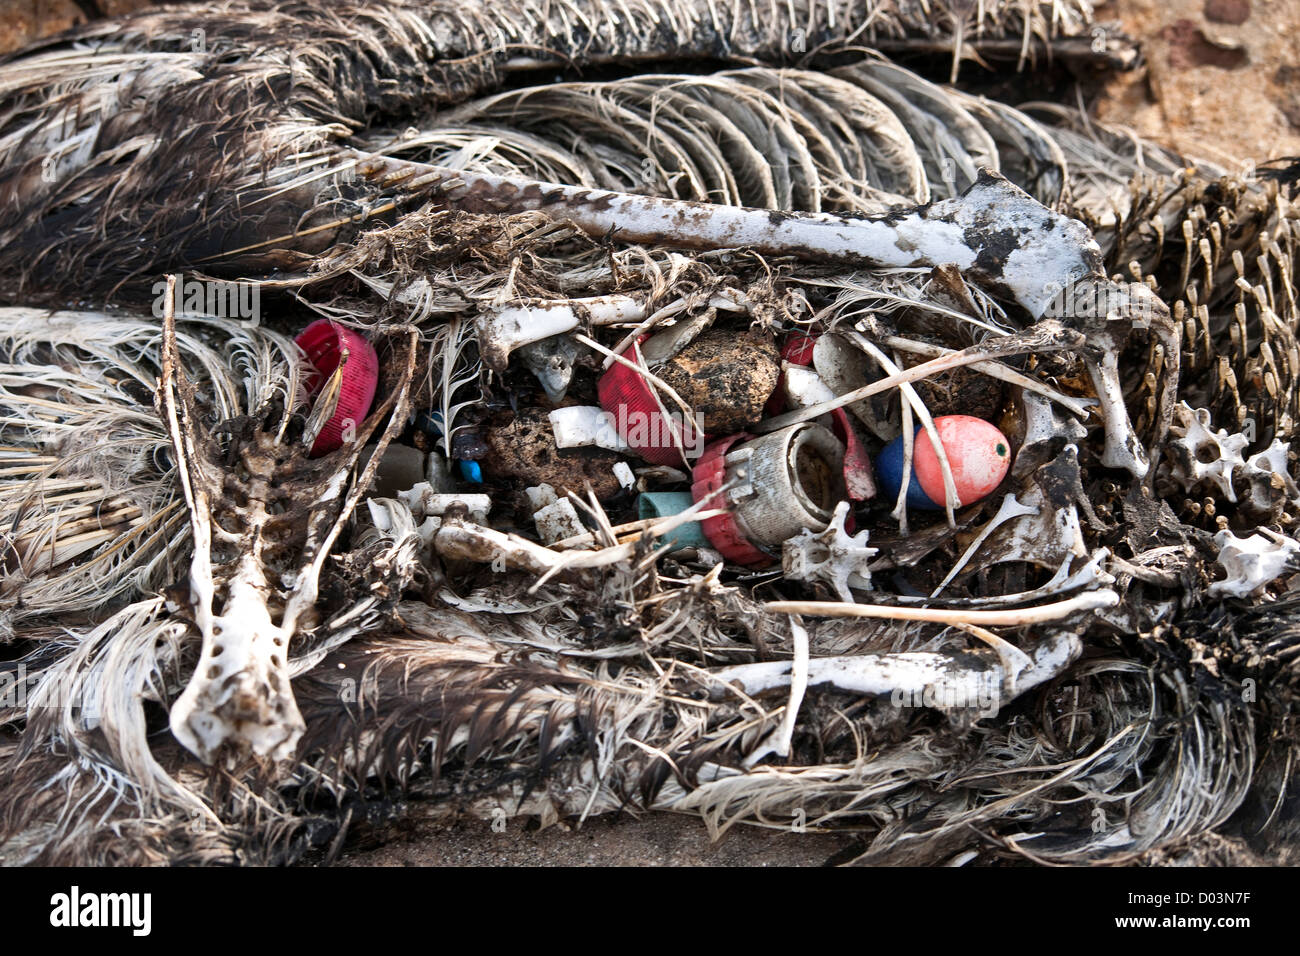 A Black-footed Albatross (Phoebastria albatrus, endangered) dead from the ingestion of too much plastic debris. Archipelago. Stock Photo